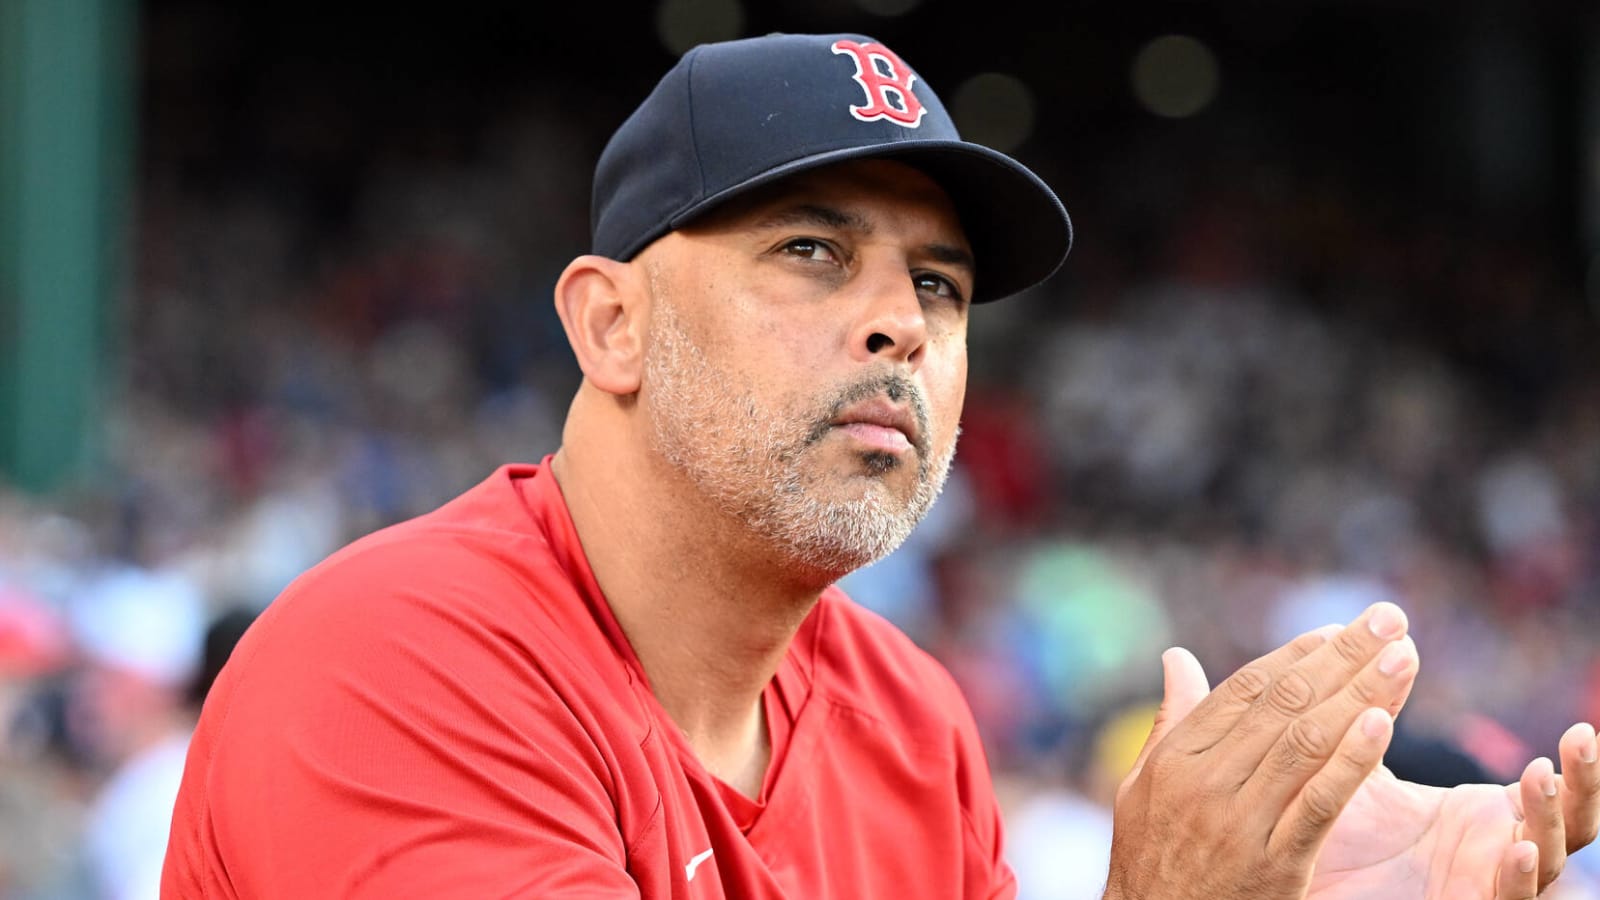 Alex Cora: Saturday's loss one of worst days since he took over